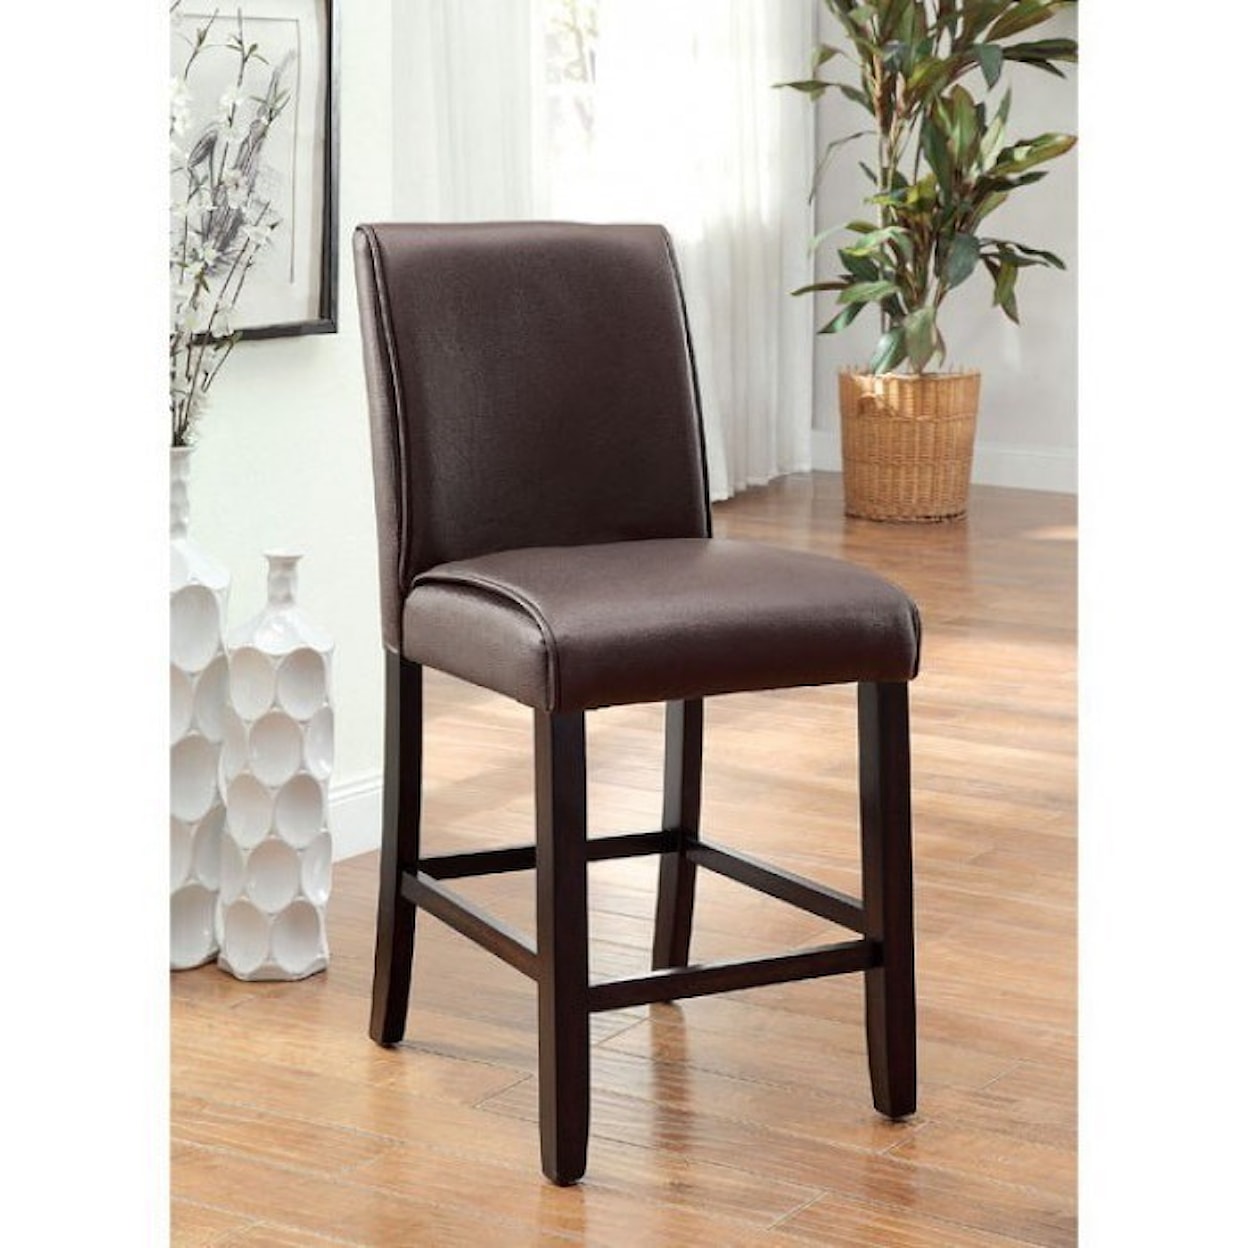 Furniture of America Grandstone II Set of 2 Counter Height Chairs